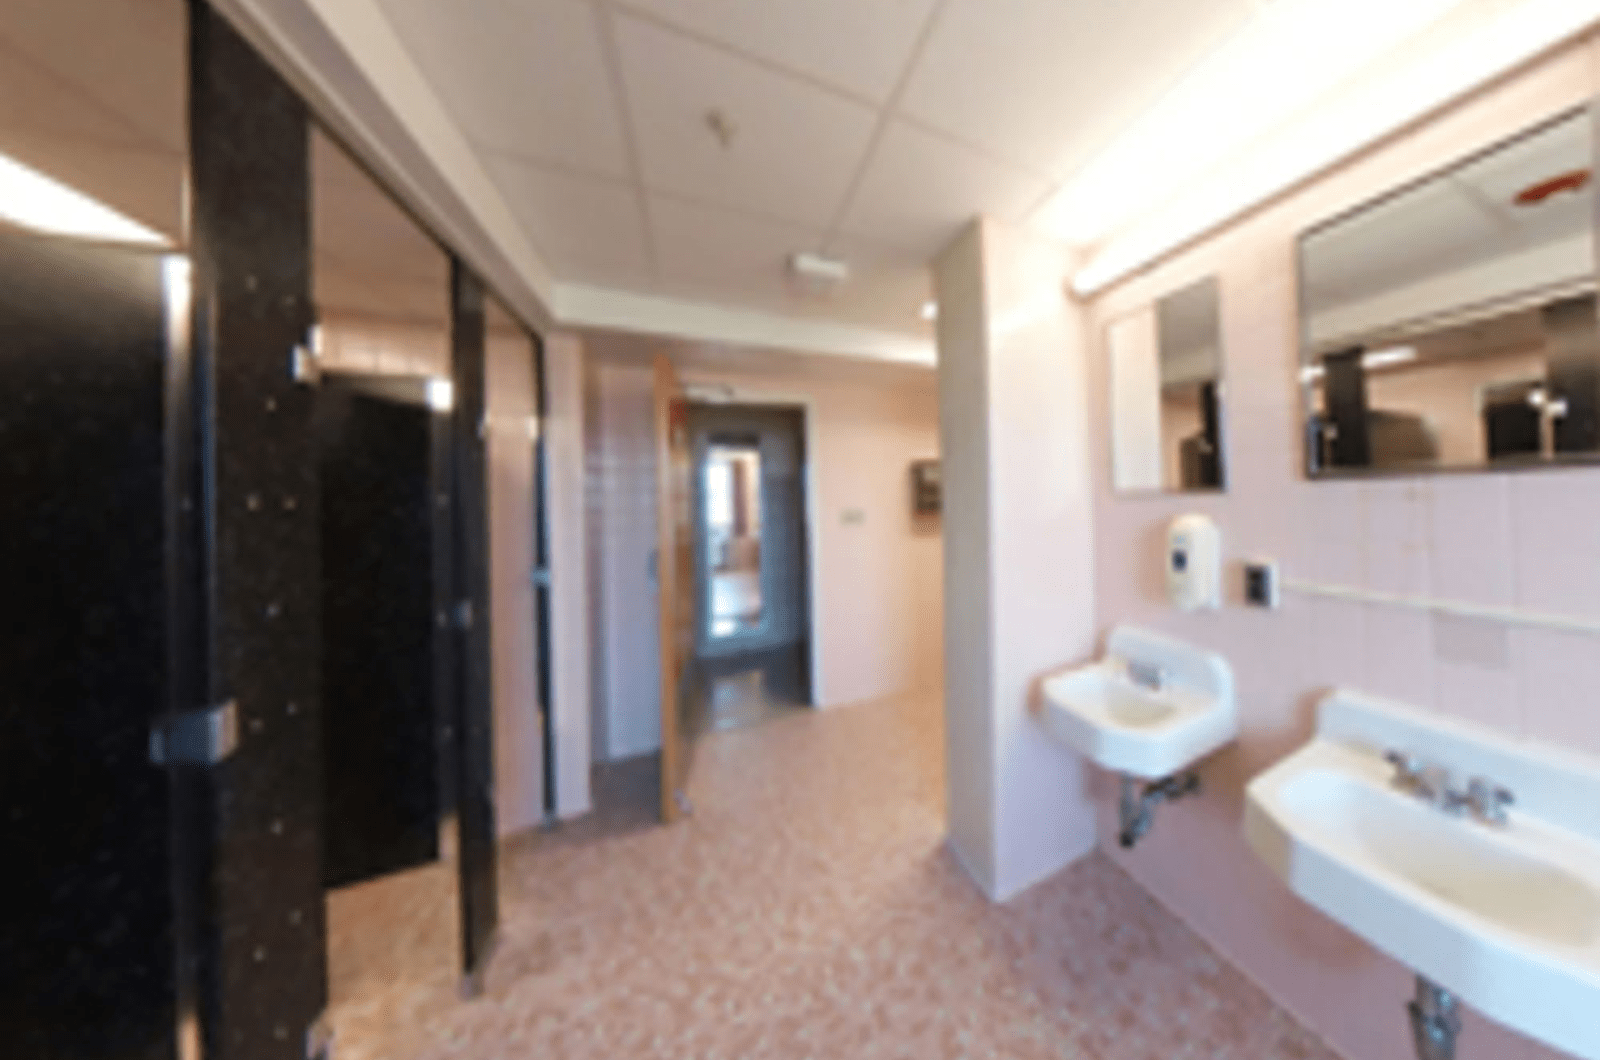 inside bathroom with multiple stalls and sinks visible